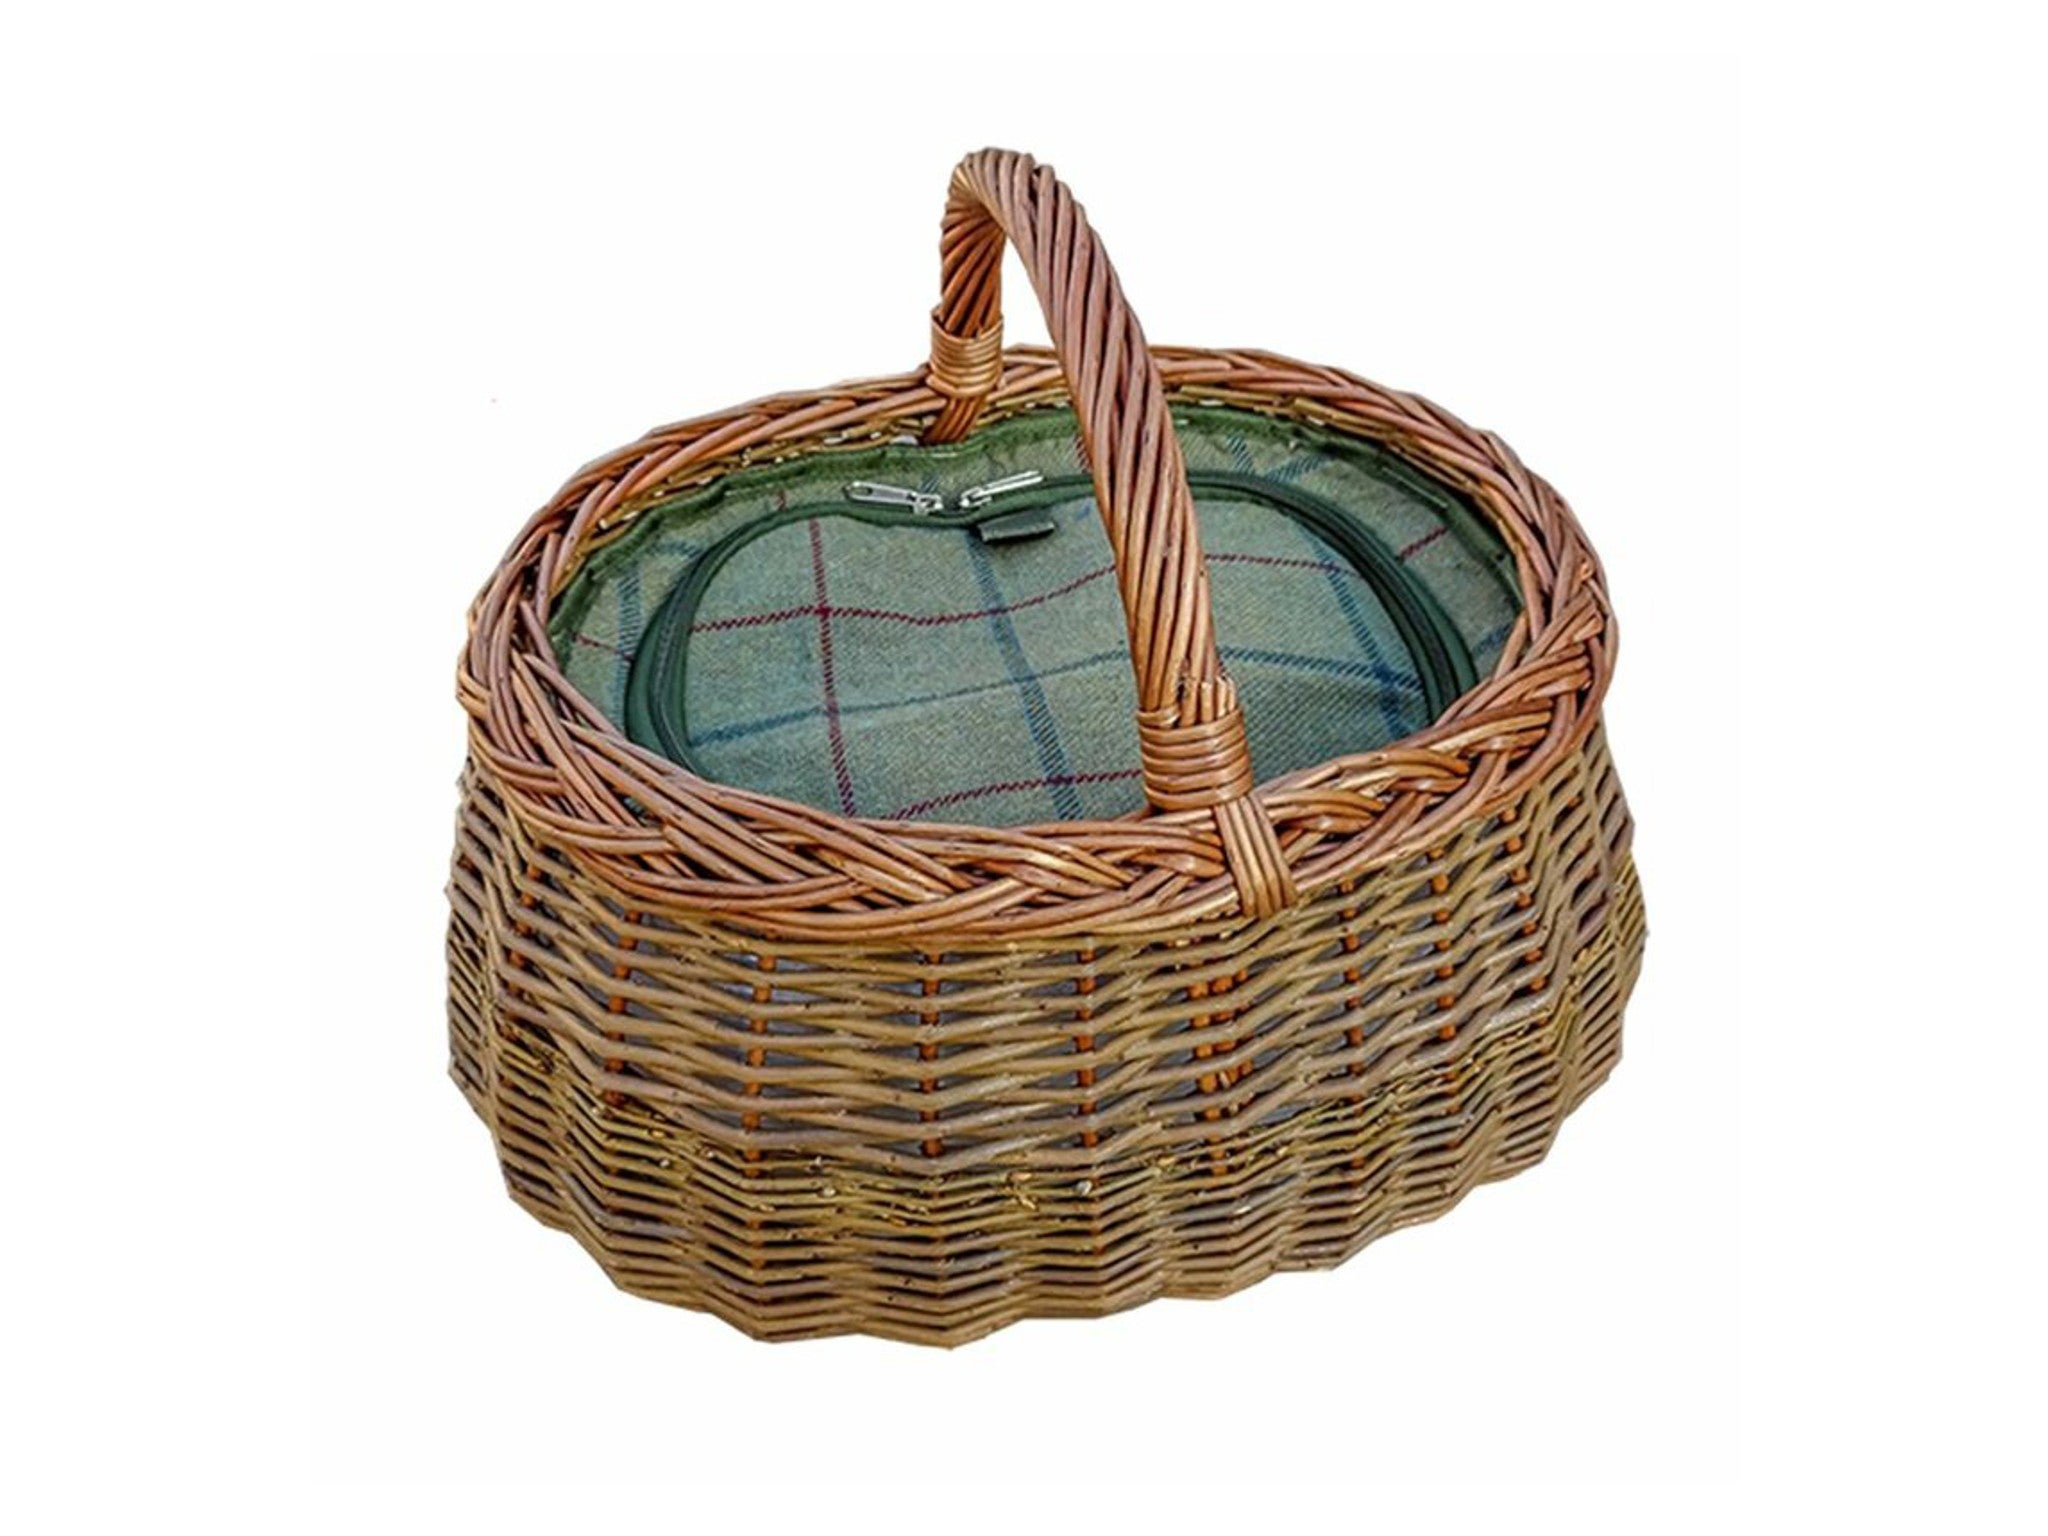 Brambly Cottage car wicker picnic basket with fitted cooler